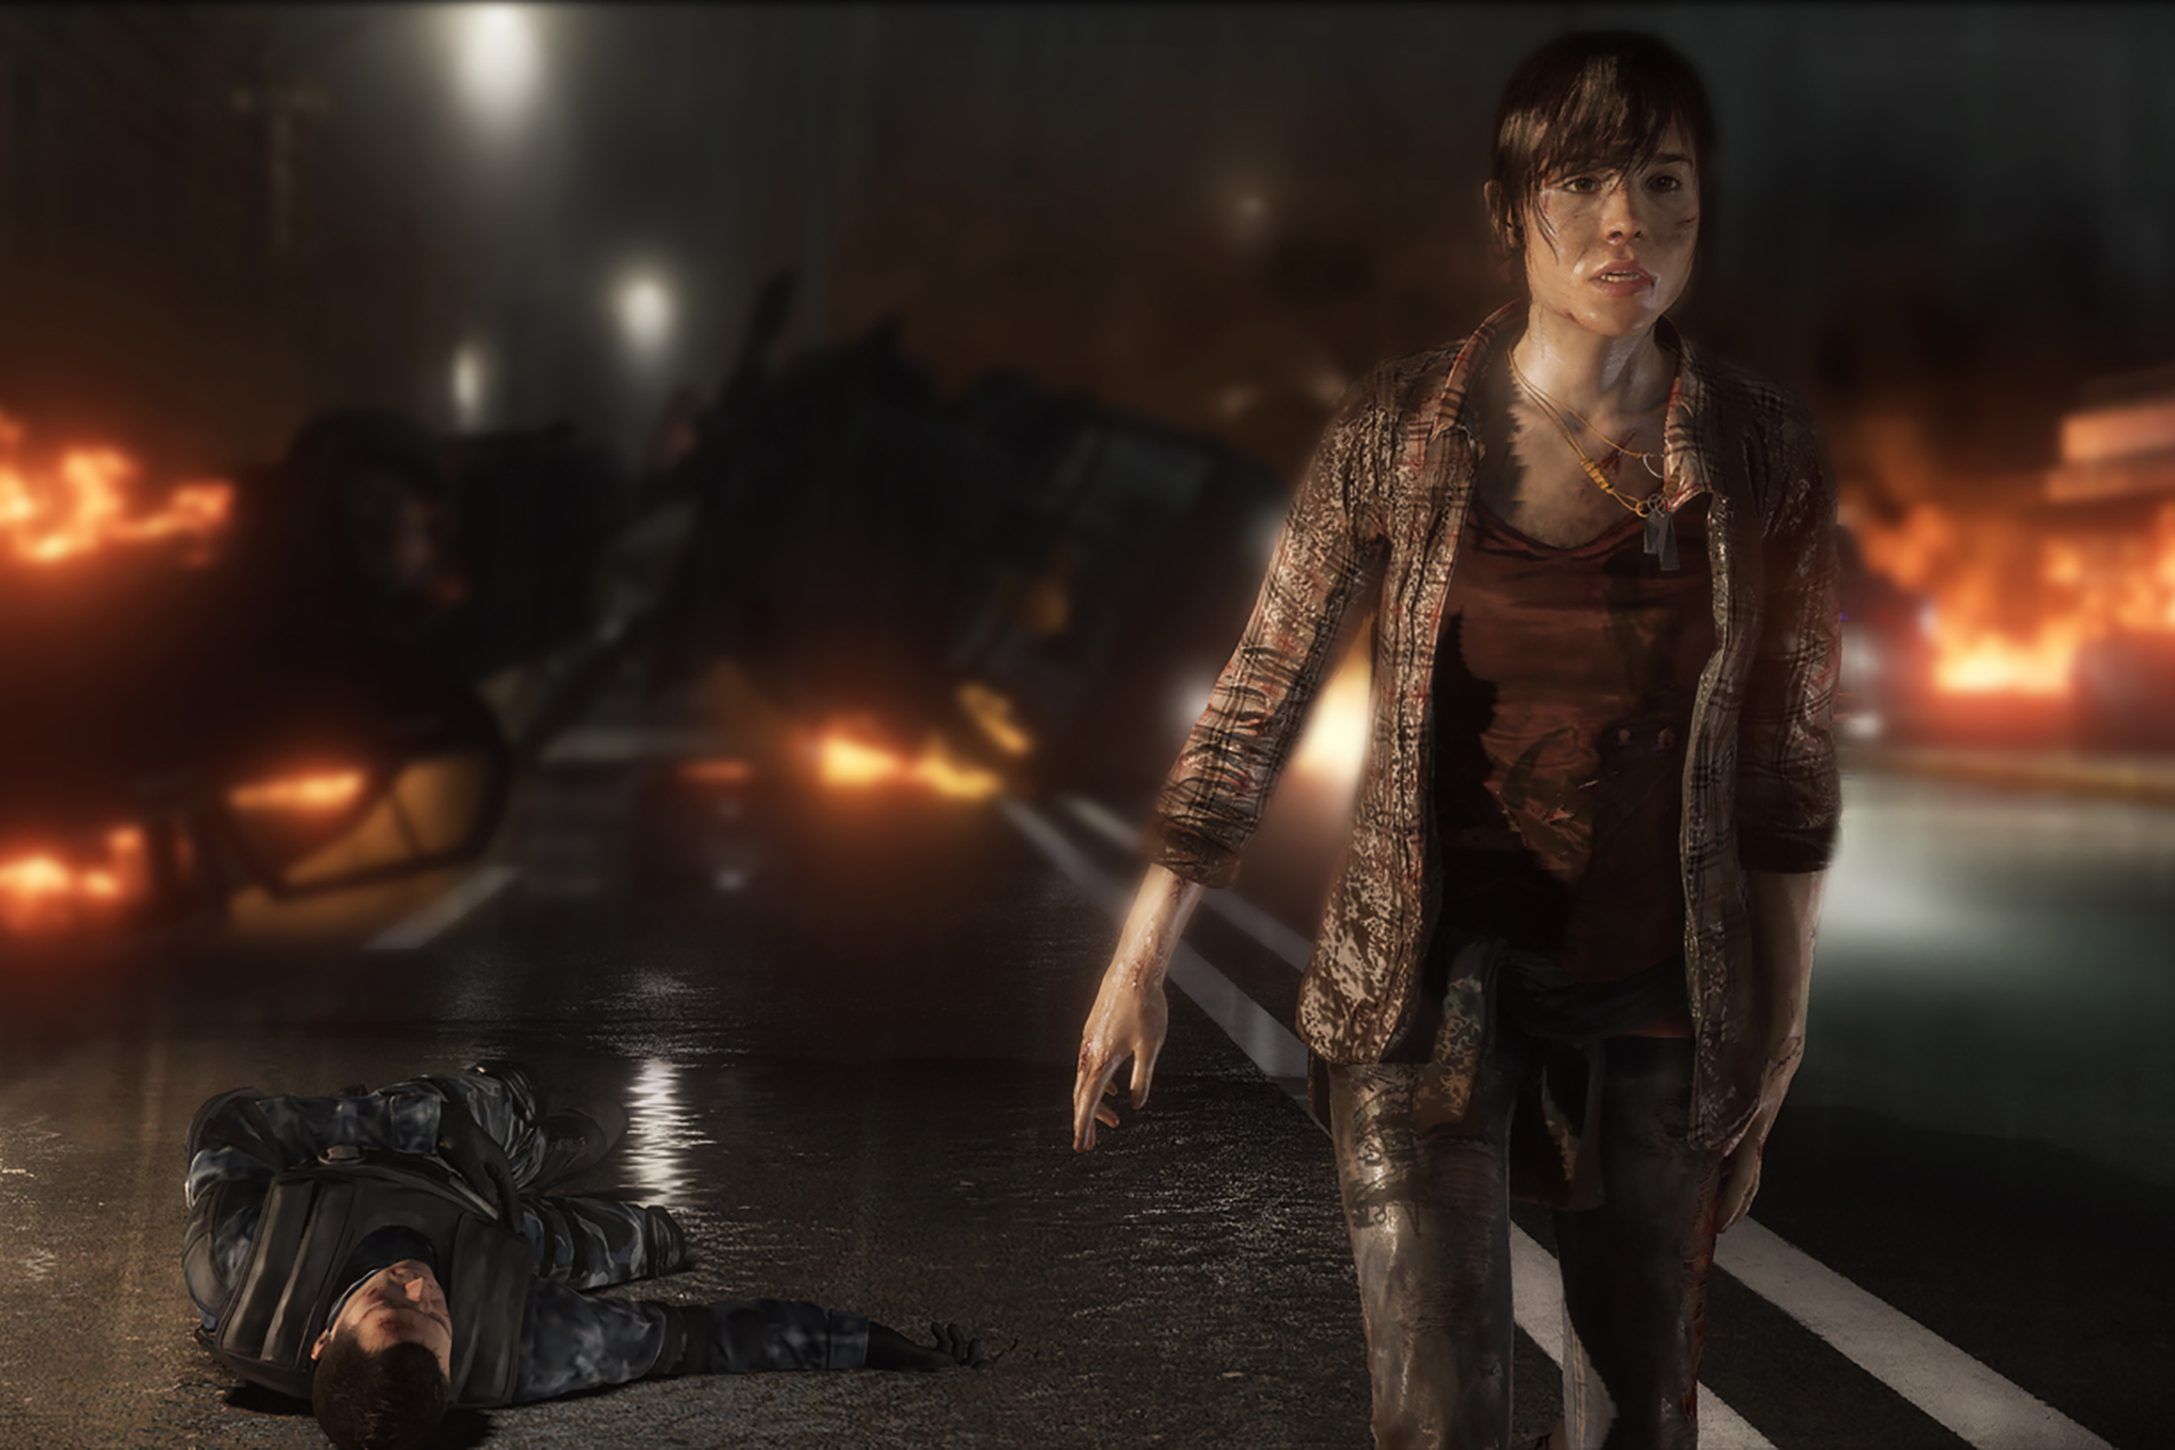 Beyond Two Souls character standing looking dishevelled, with a man lying in the background